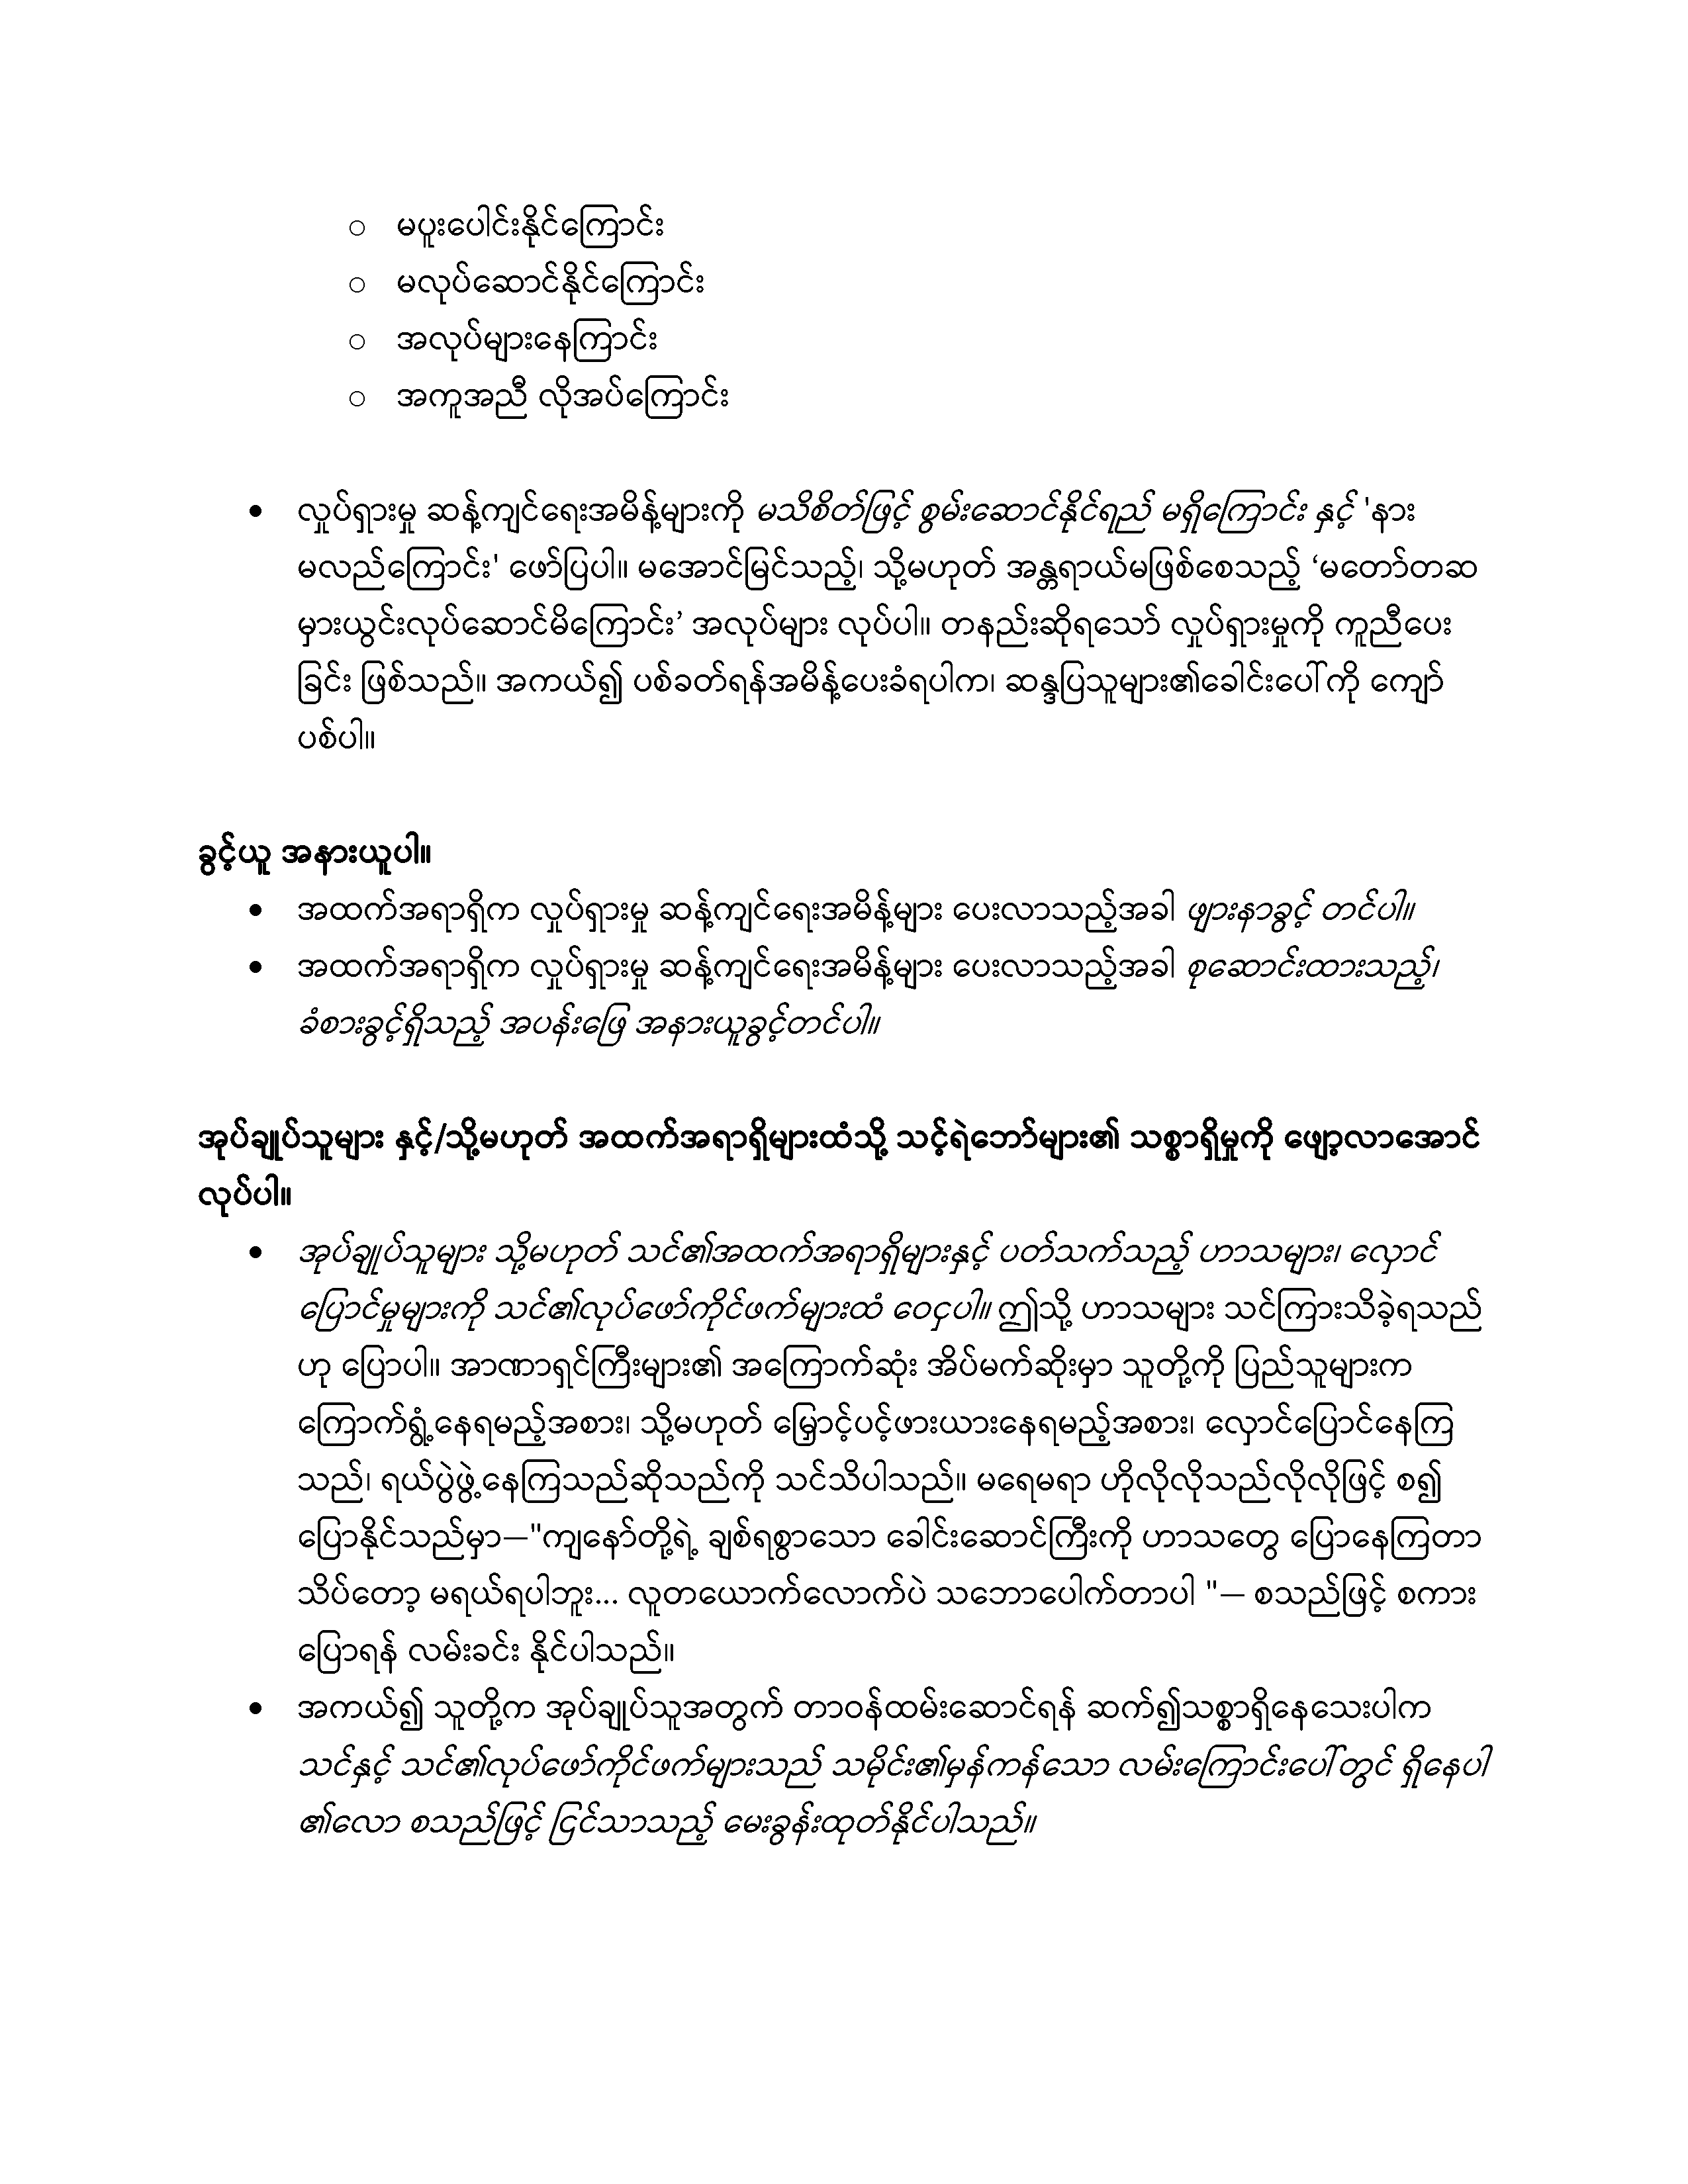 For Members of Security Forces: A Guide to Supporting Pro-Democracy Movements (Burmese)